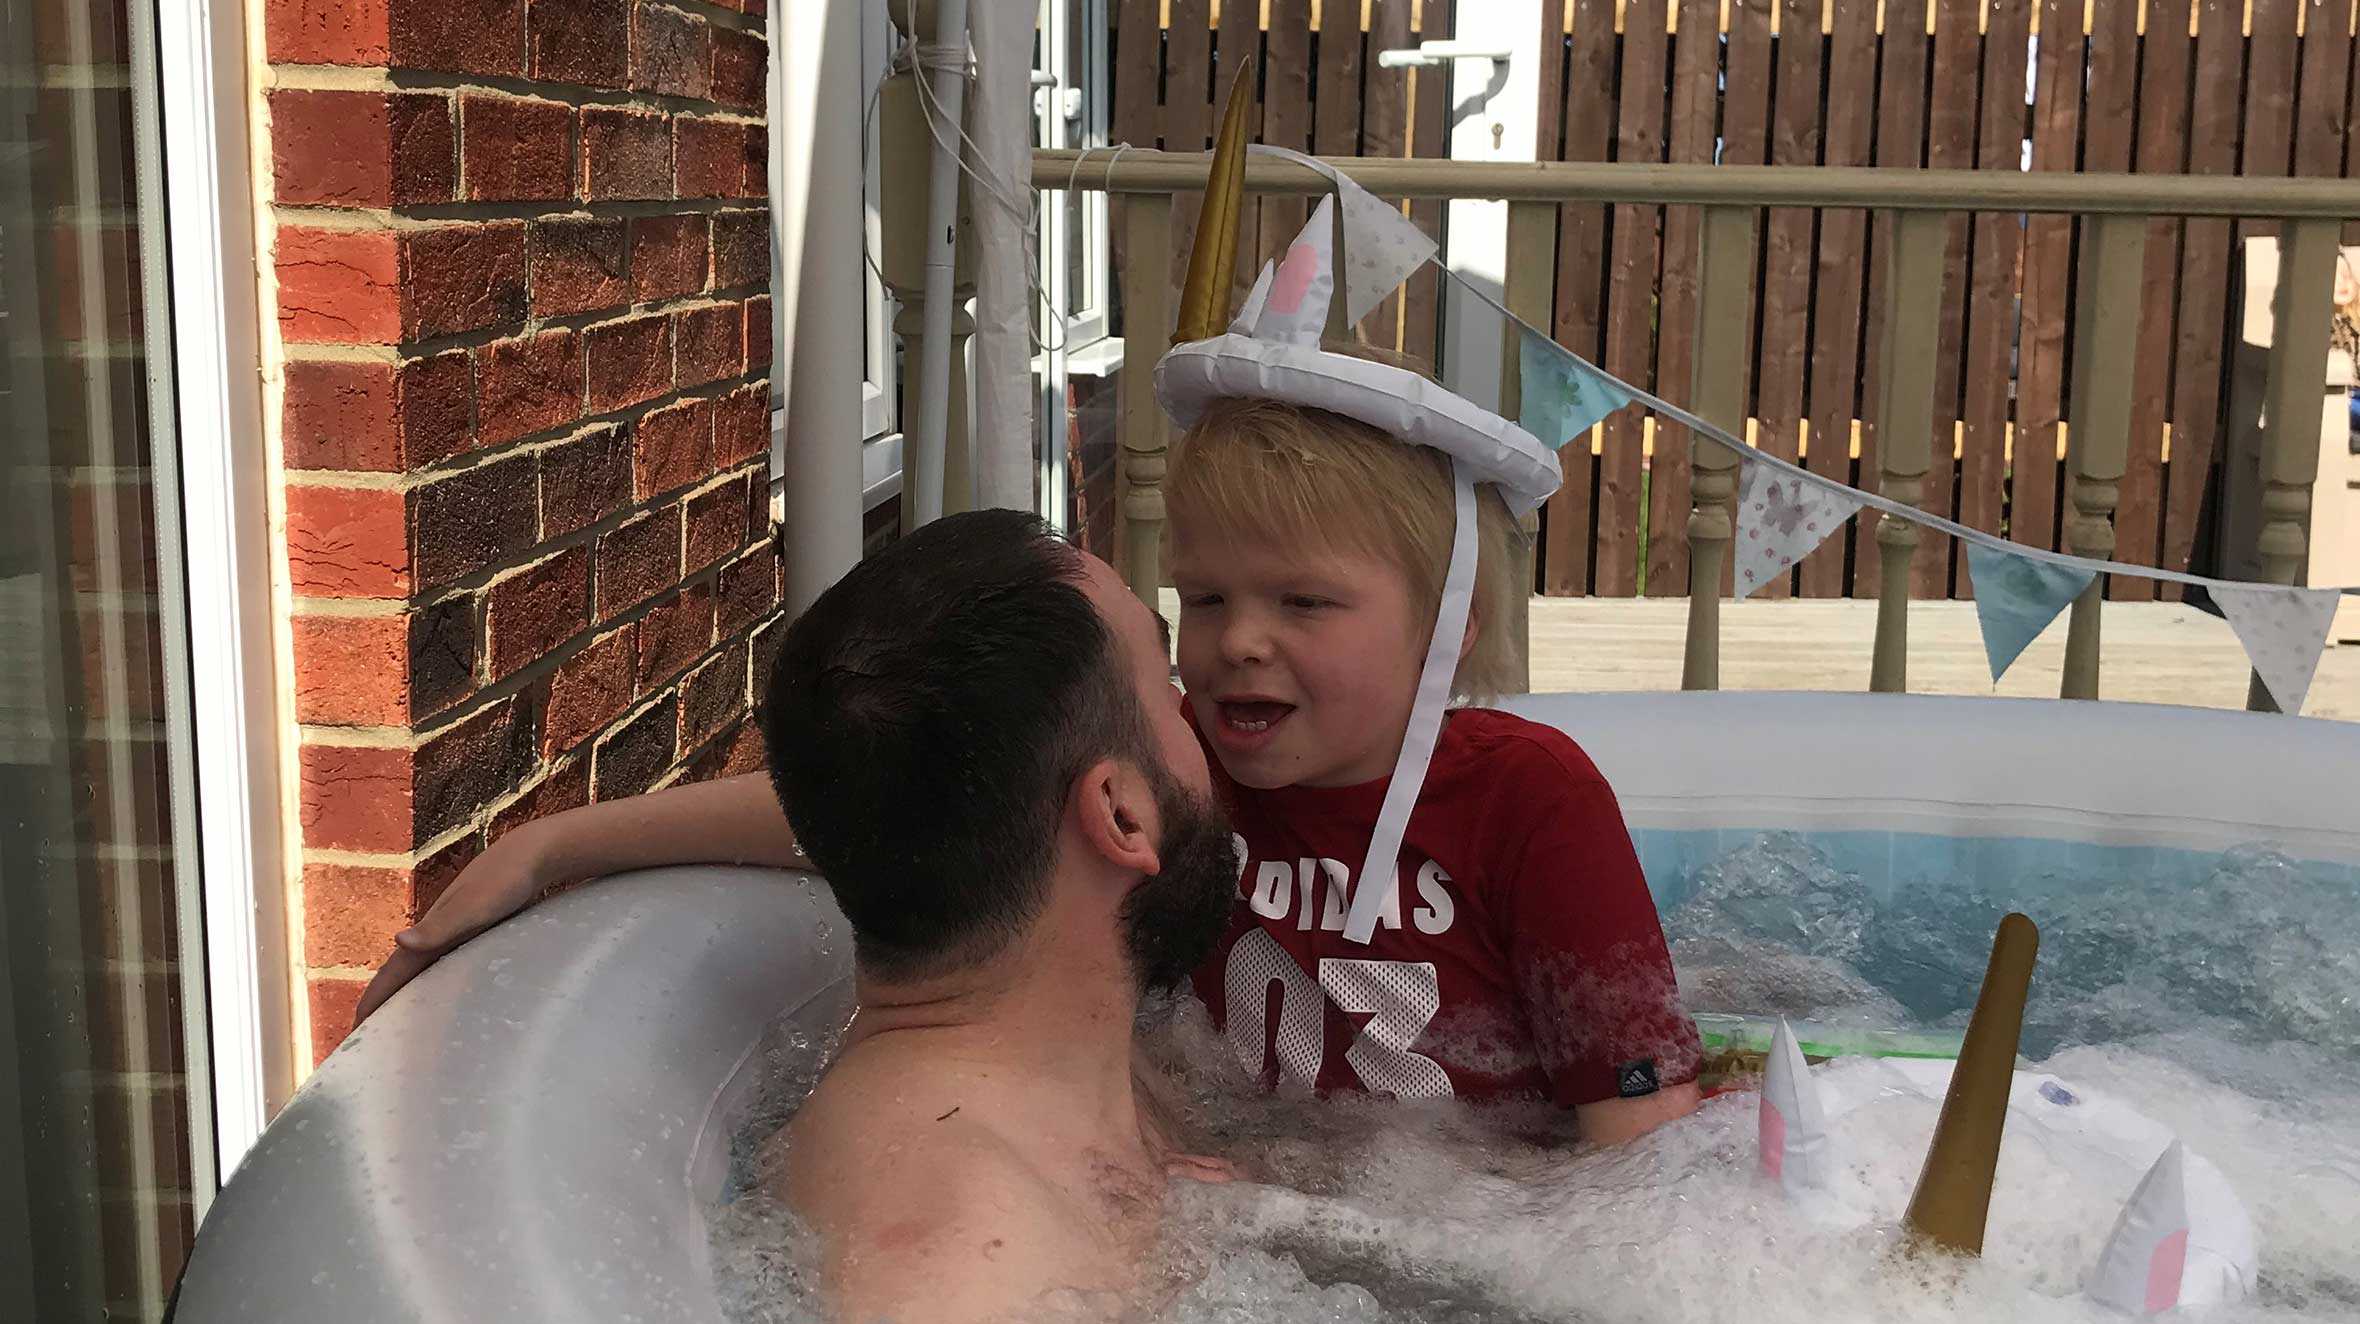 Jack, wearing a red t-shirt and an inflatable unicorn hat, is sitting in a hot tub with his dad and looking into his dad's eyes.